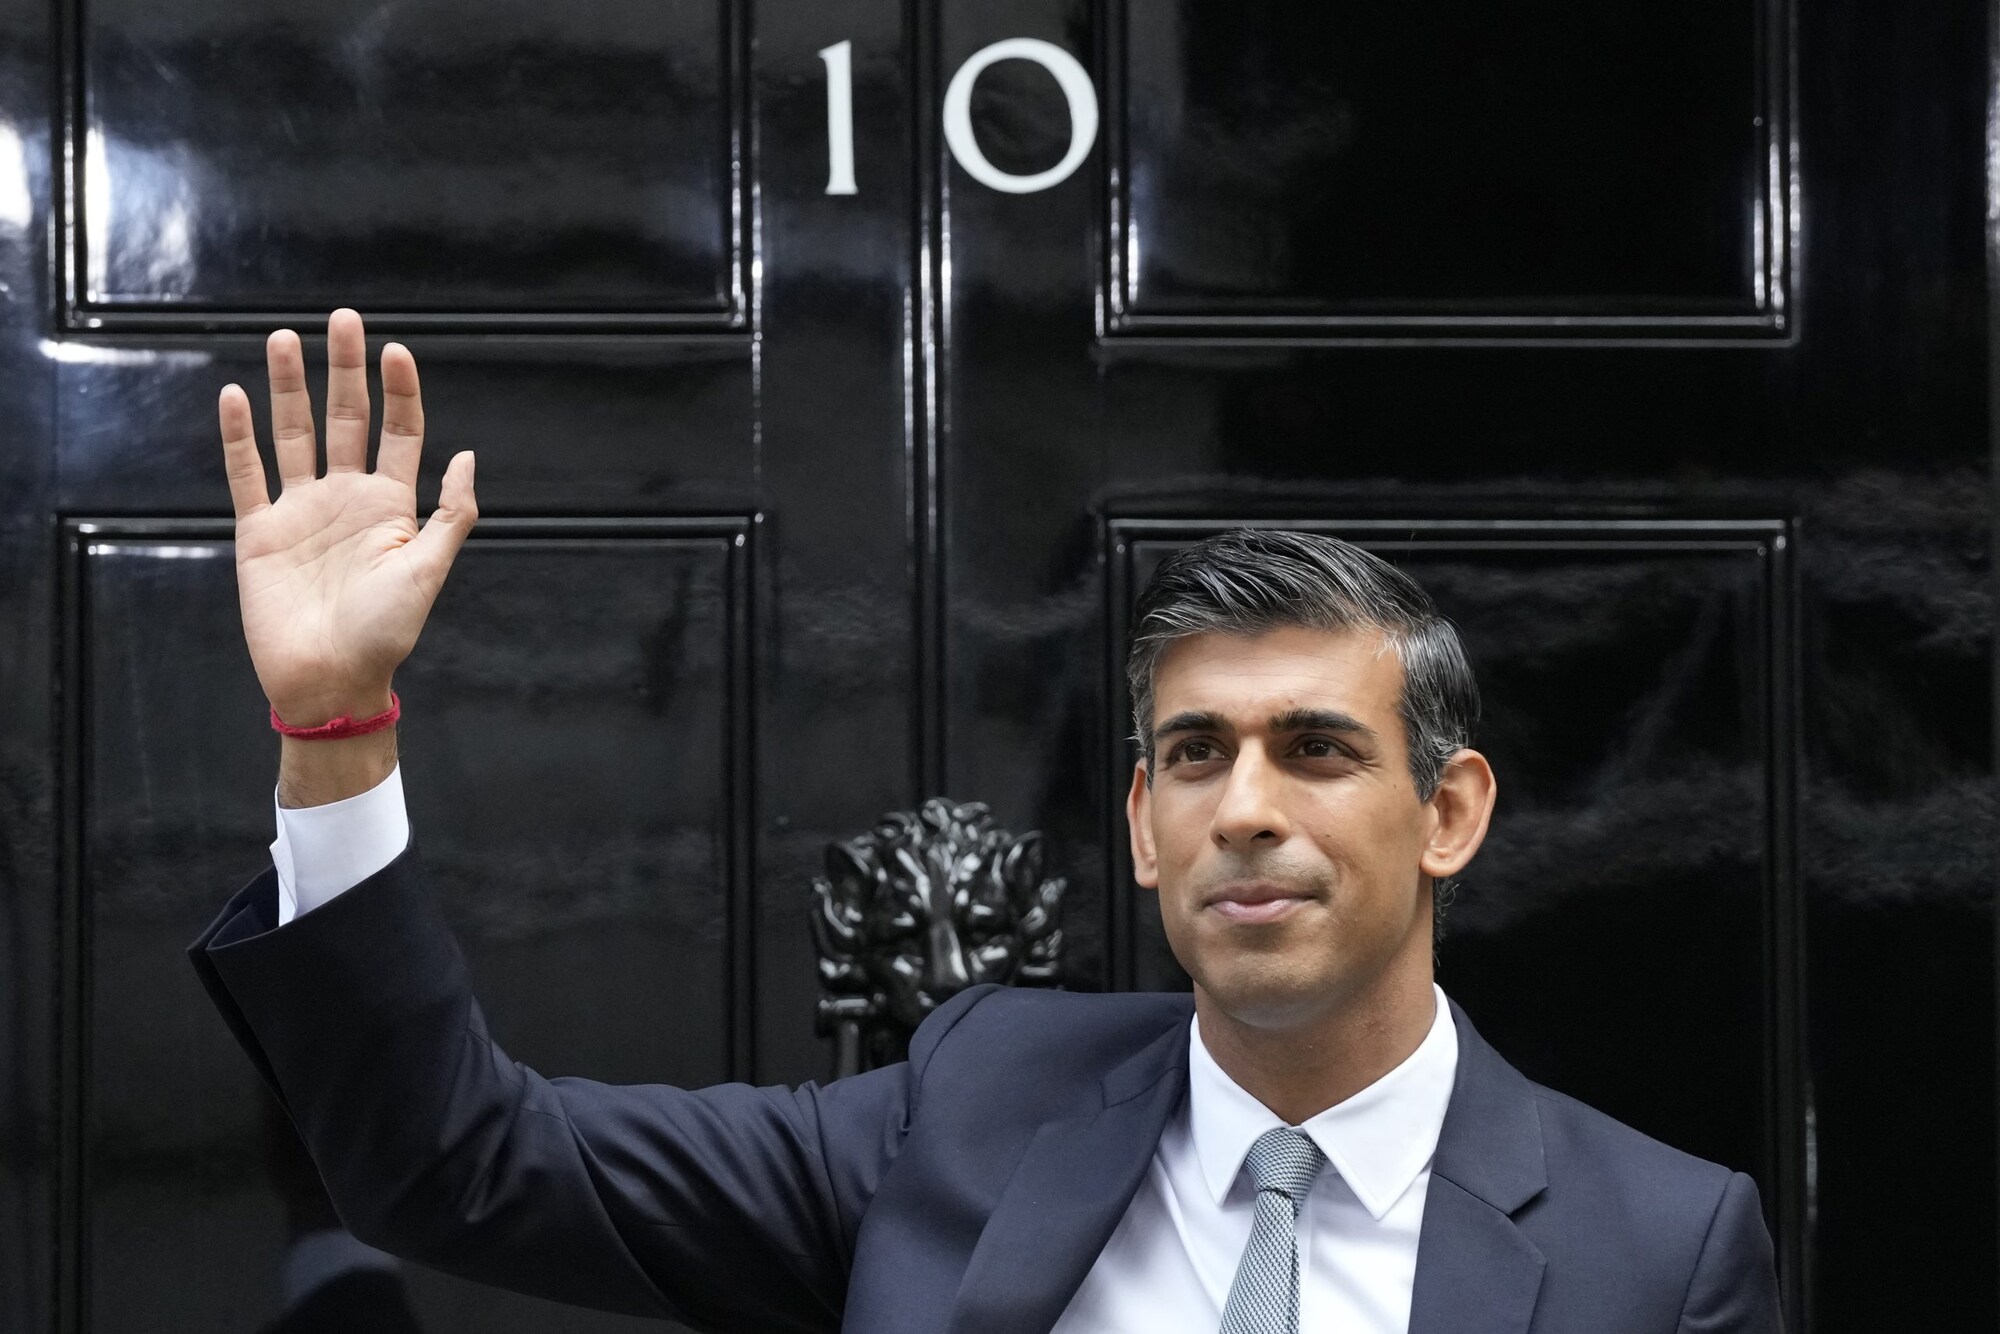 Strikes scandals and more How UKs Rishi Sunak has fared in office in his first 100 days